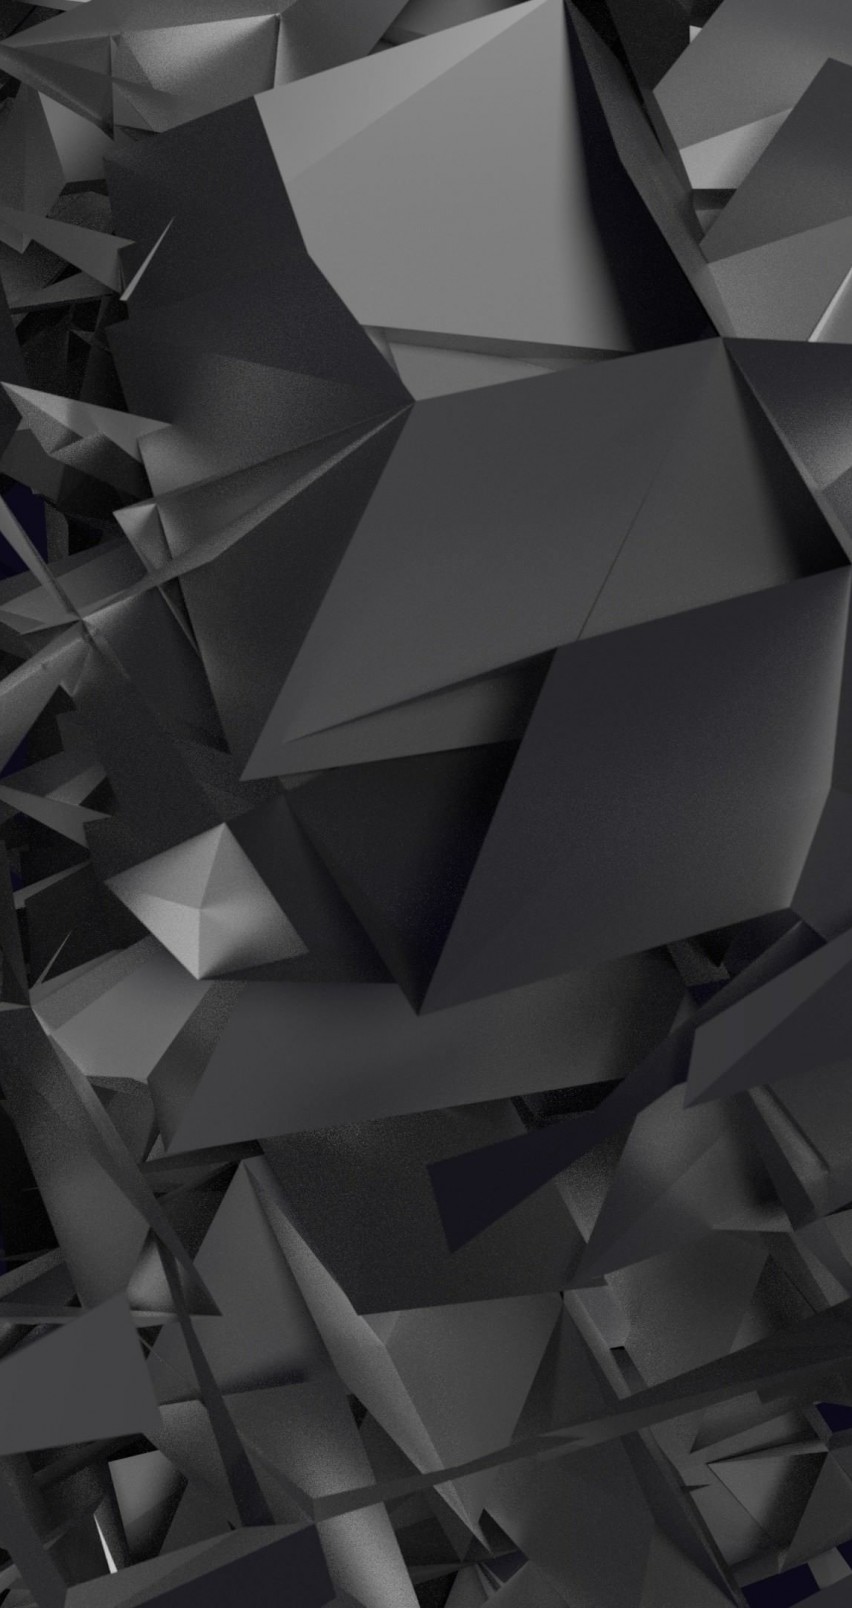 3D Geometry Wallpaper for Apple iPhone 6 / 6s